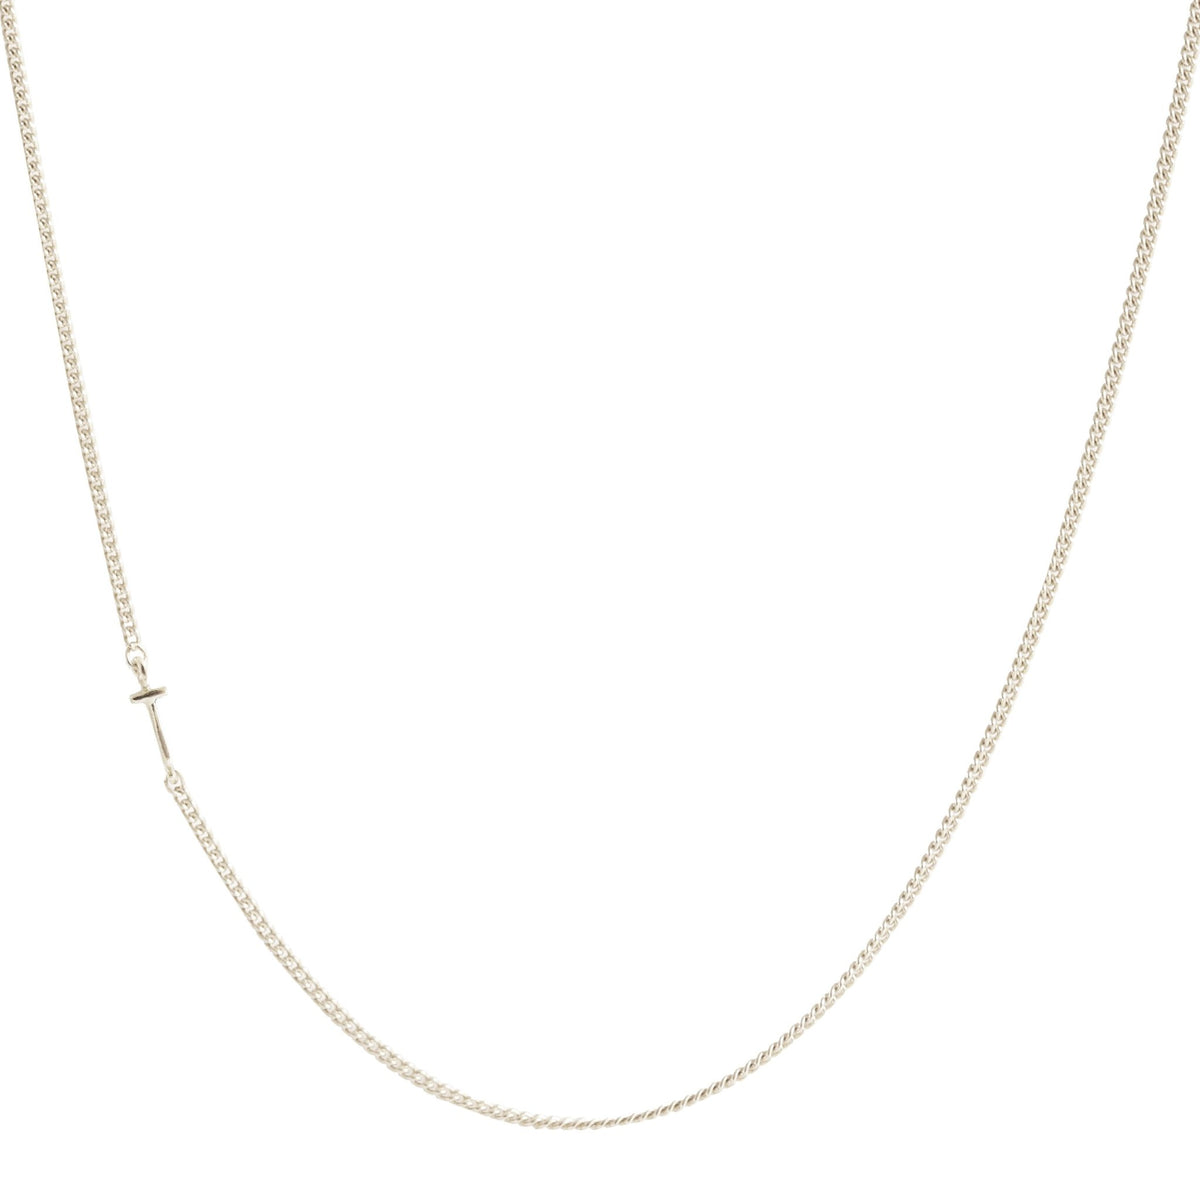 NOTABLE OFFSET INITIAL NECKLACE - T - GOLD, ROSE GOLD, OR SILVER - SO PRETTY CARA COTTER